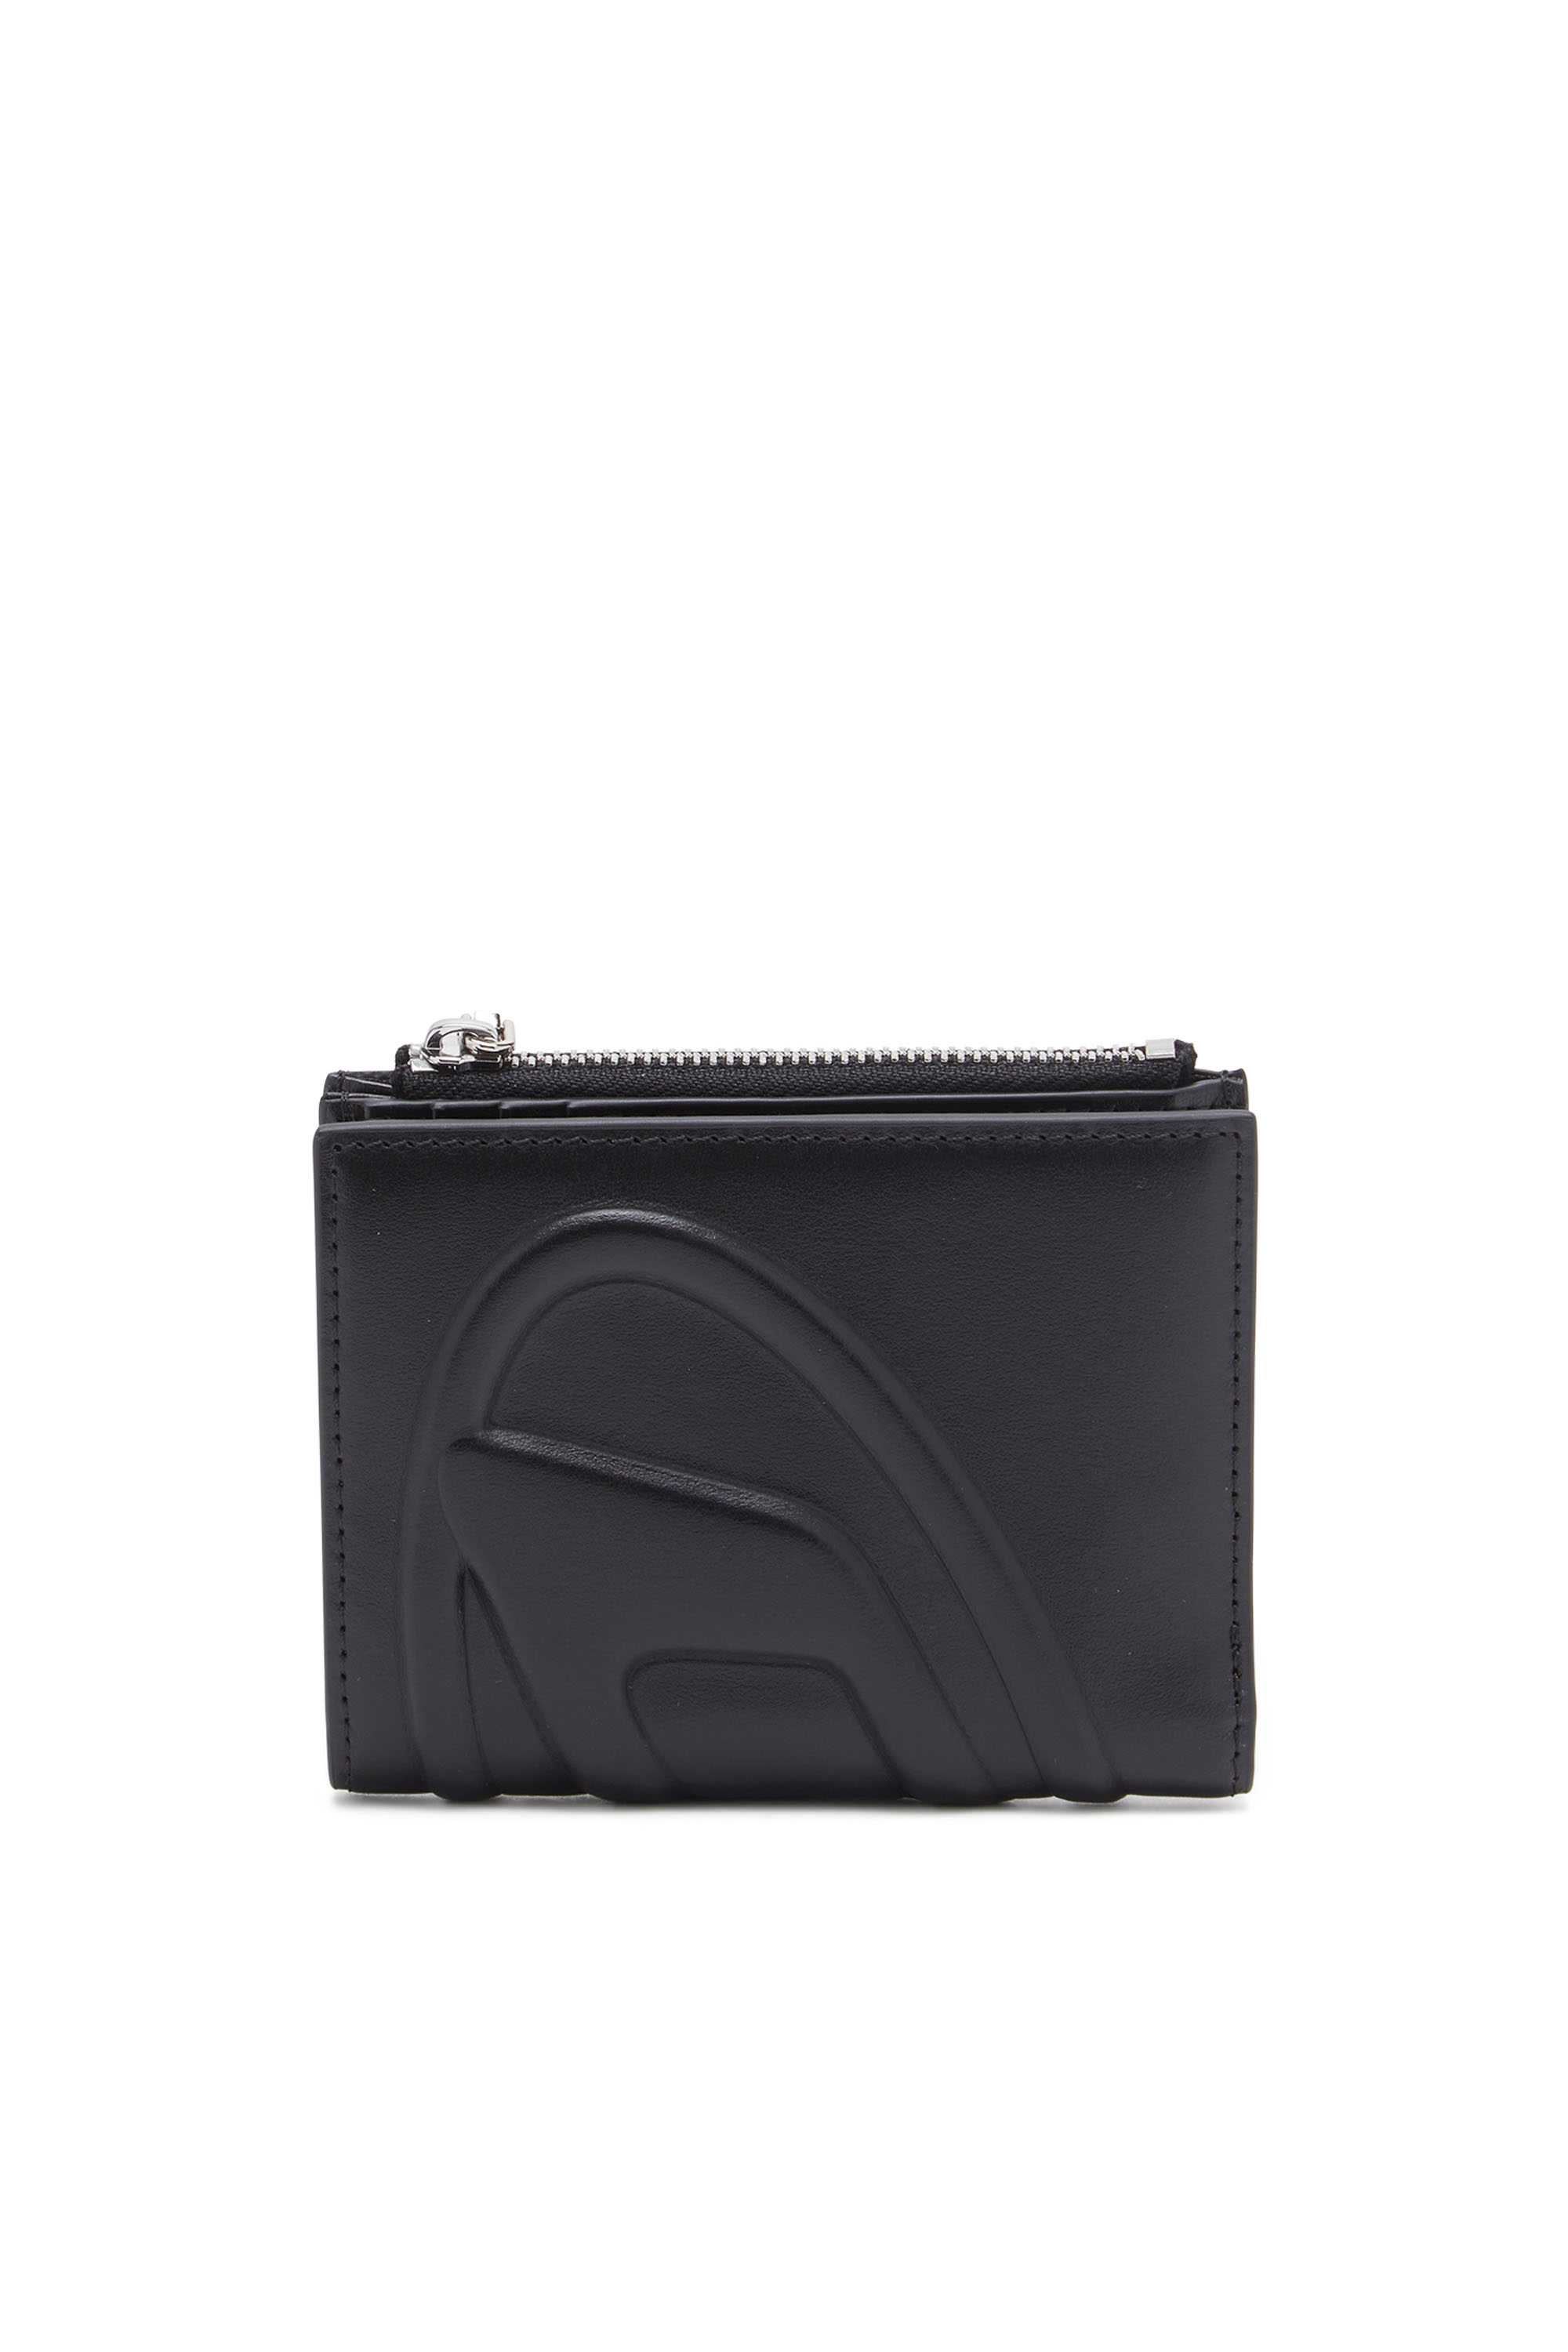 Diesel - Small leather wallet with embossed logo - Small Wallets - Woman - Black